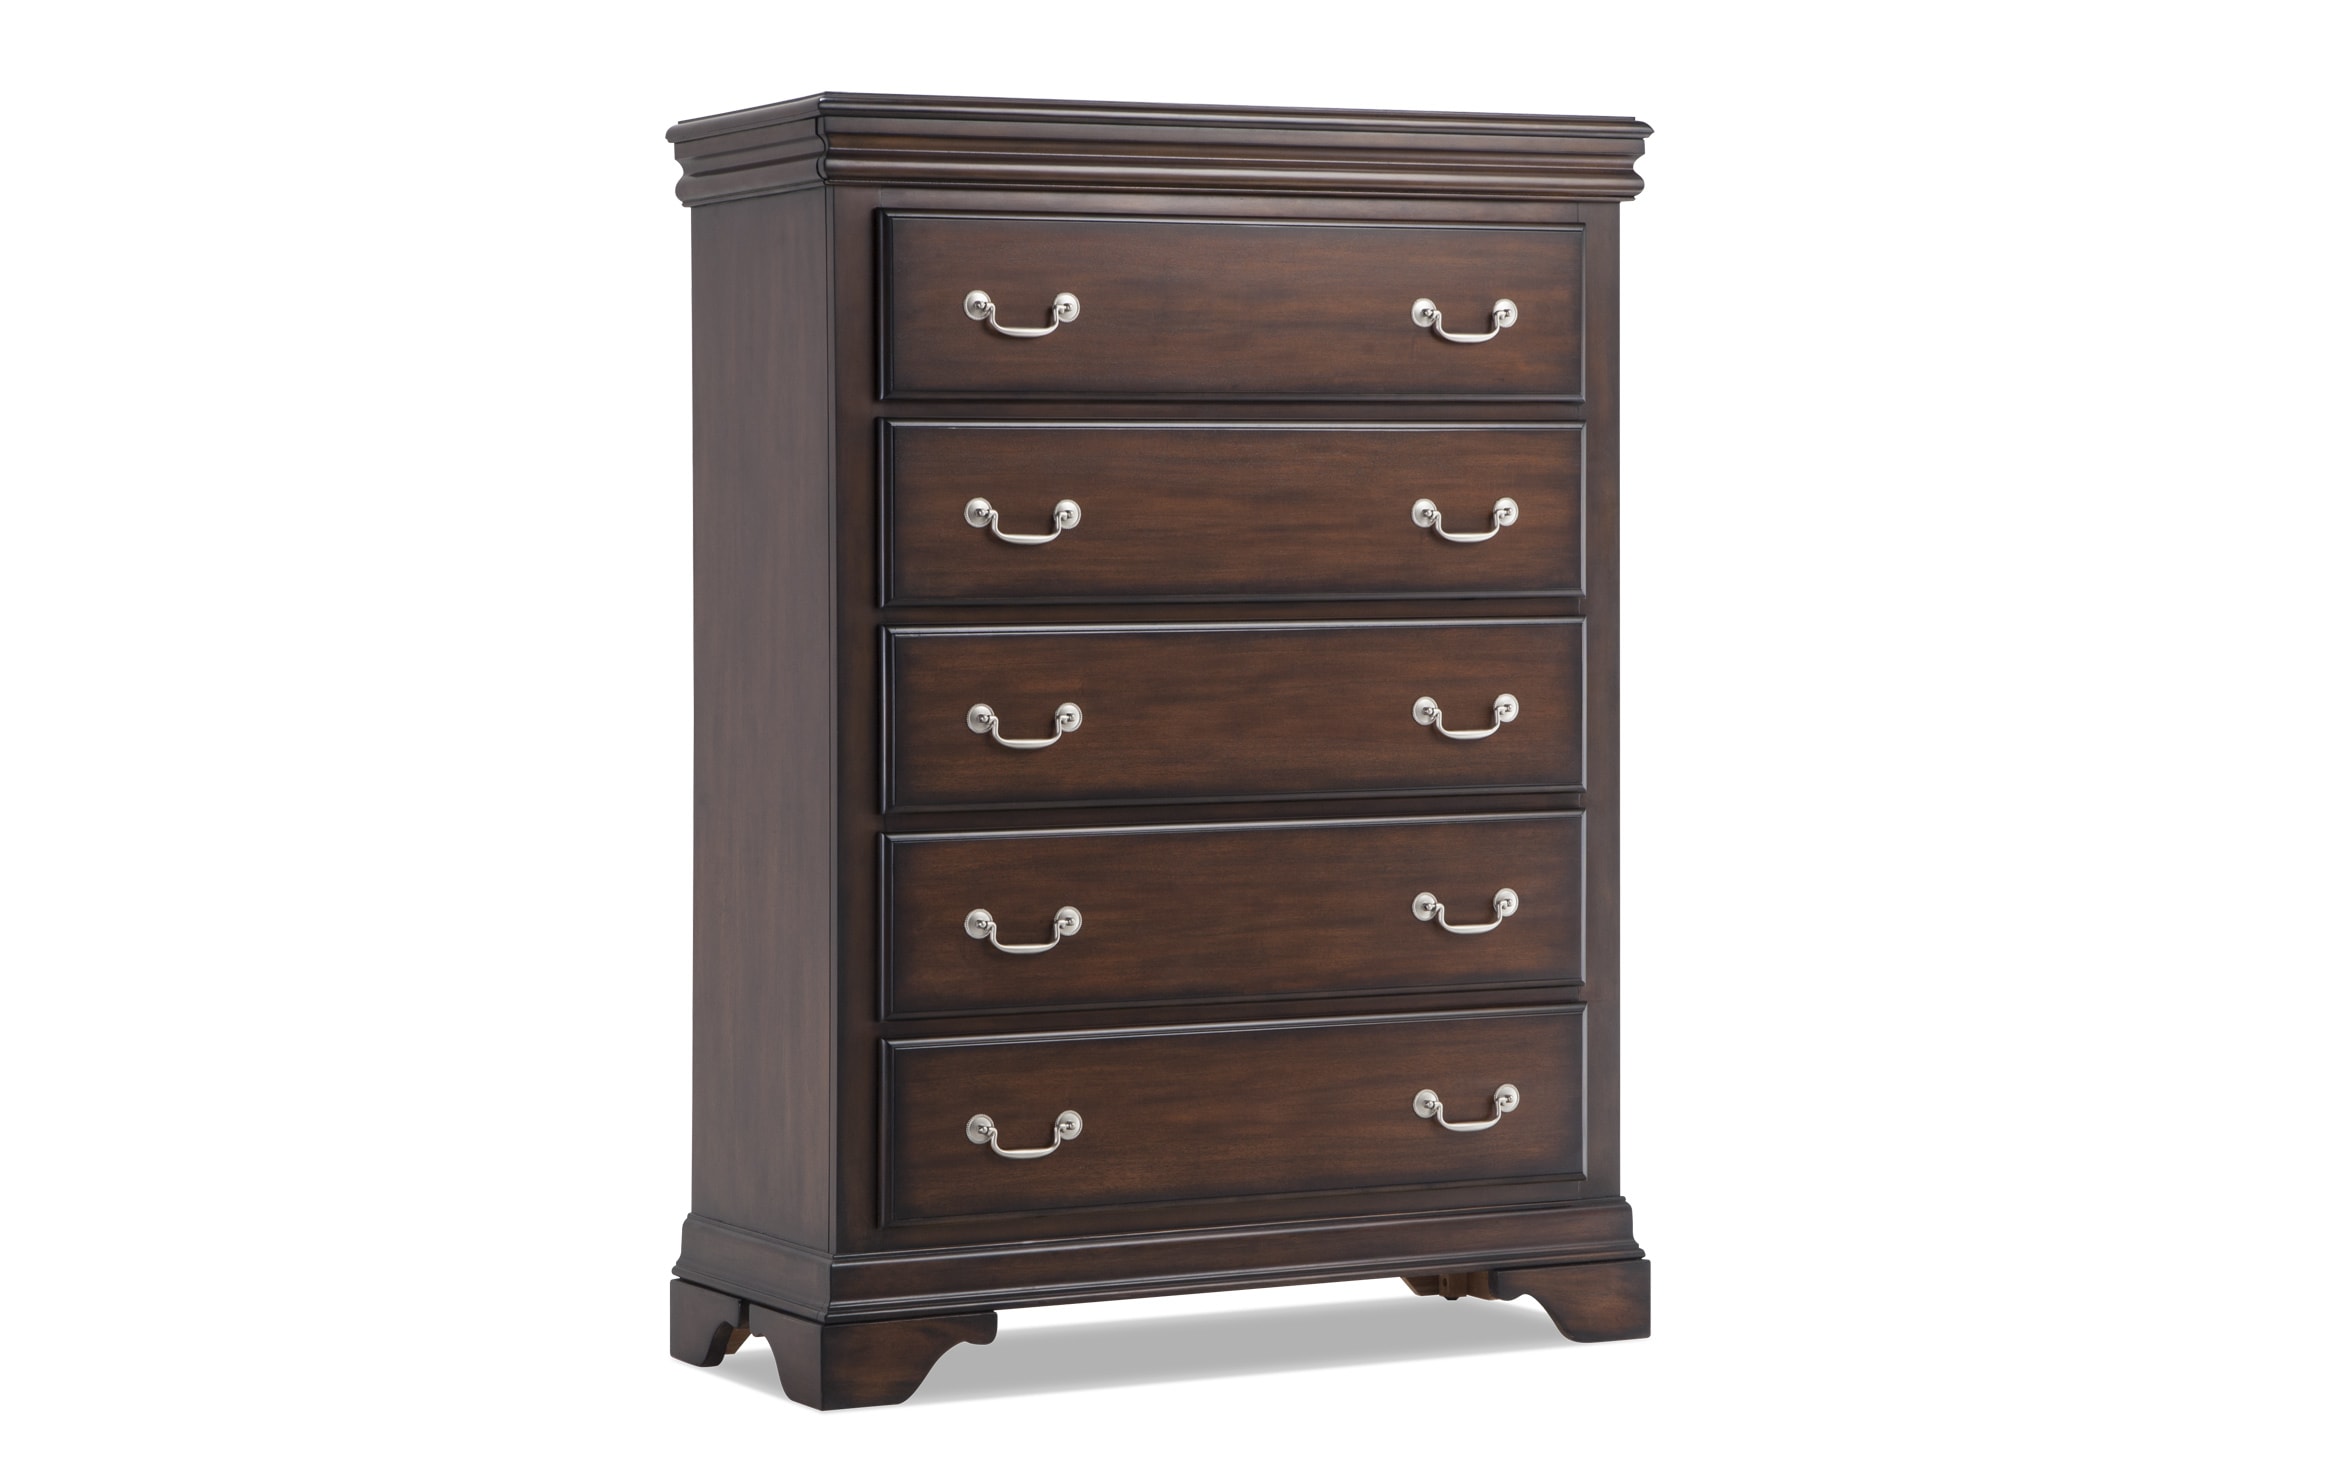 Louie Cherry 5 Drawer Chest Bob, 5 Drawer Dresser With Deep Drawers